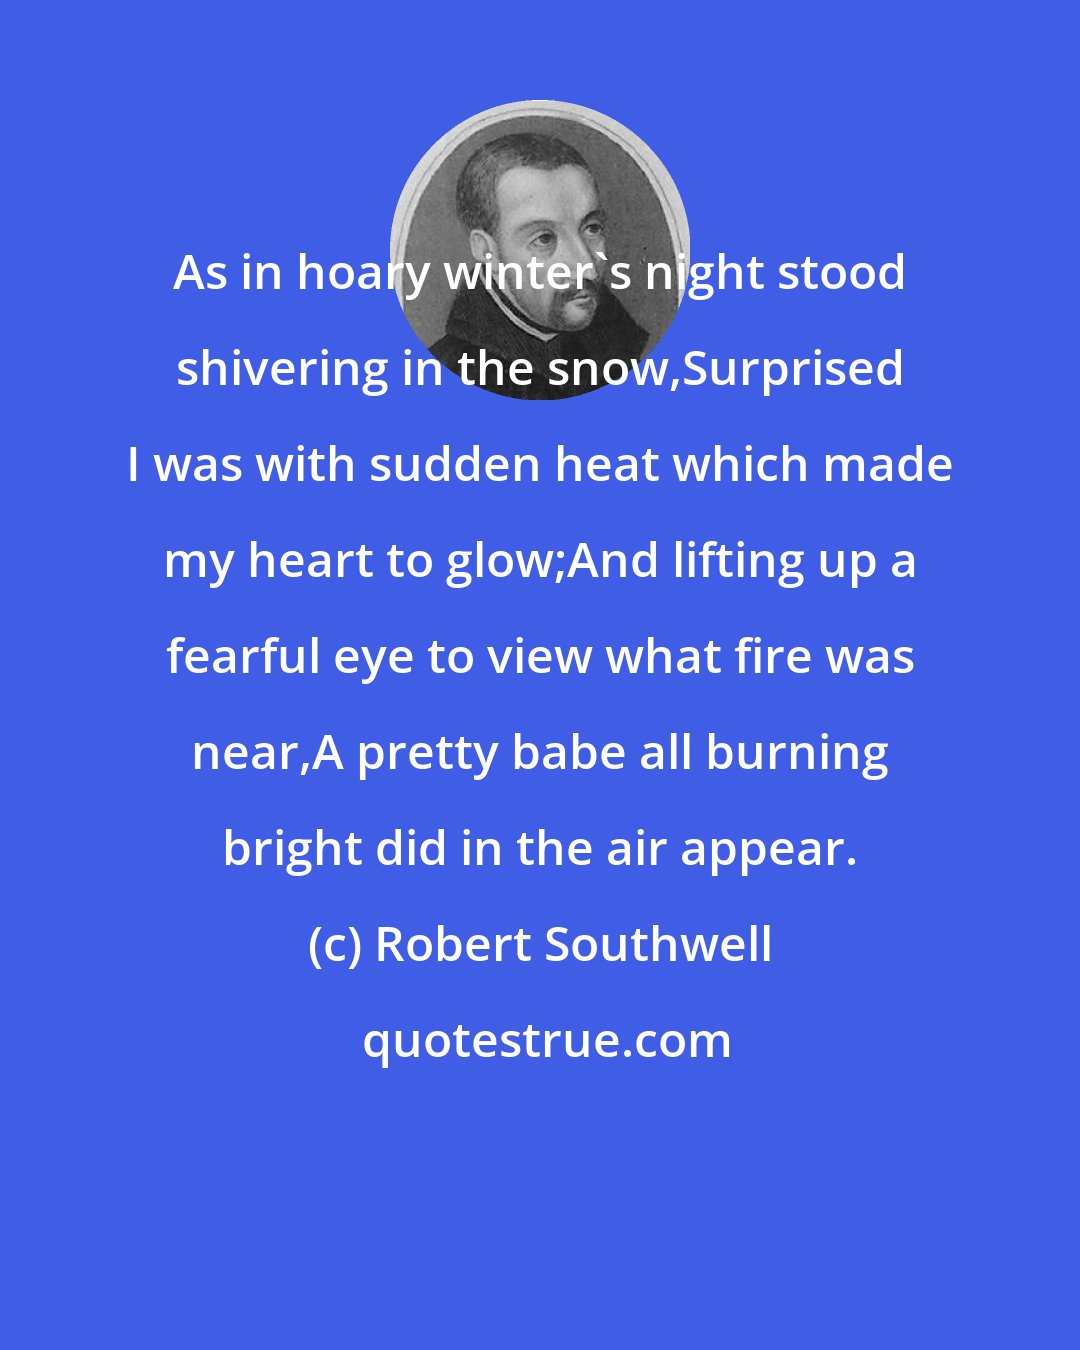 Robert Southwell: As in hoary winter's night stood shivering in the snow,Surprised I was with sudden heat which made my heart to glow;And lifting up a fearful eye to view what fire was near,A pretty babe all burning bright did in the air appear.